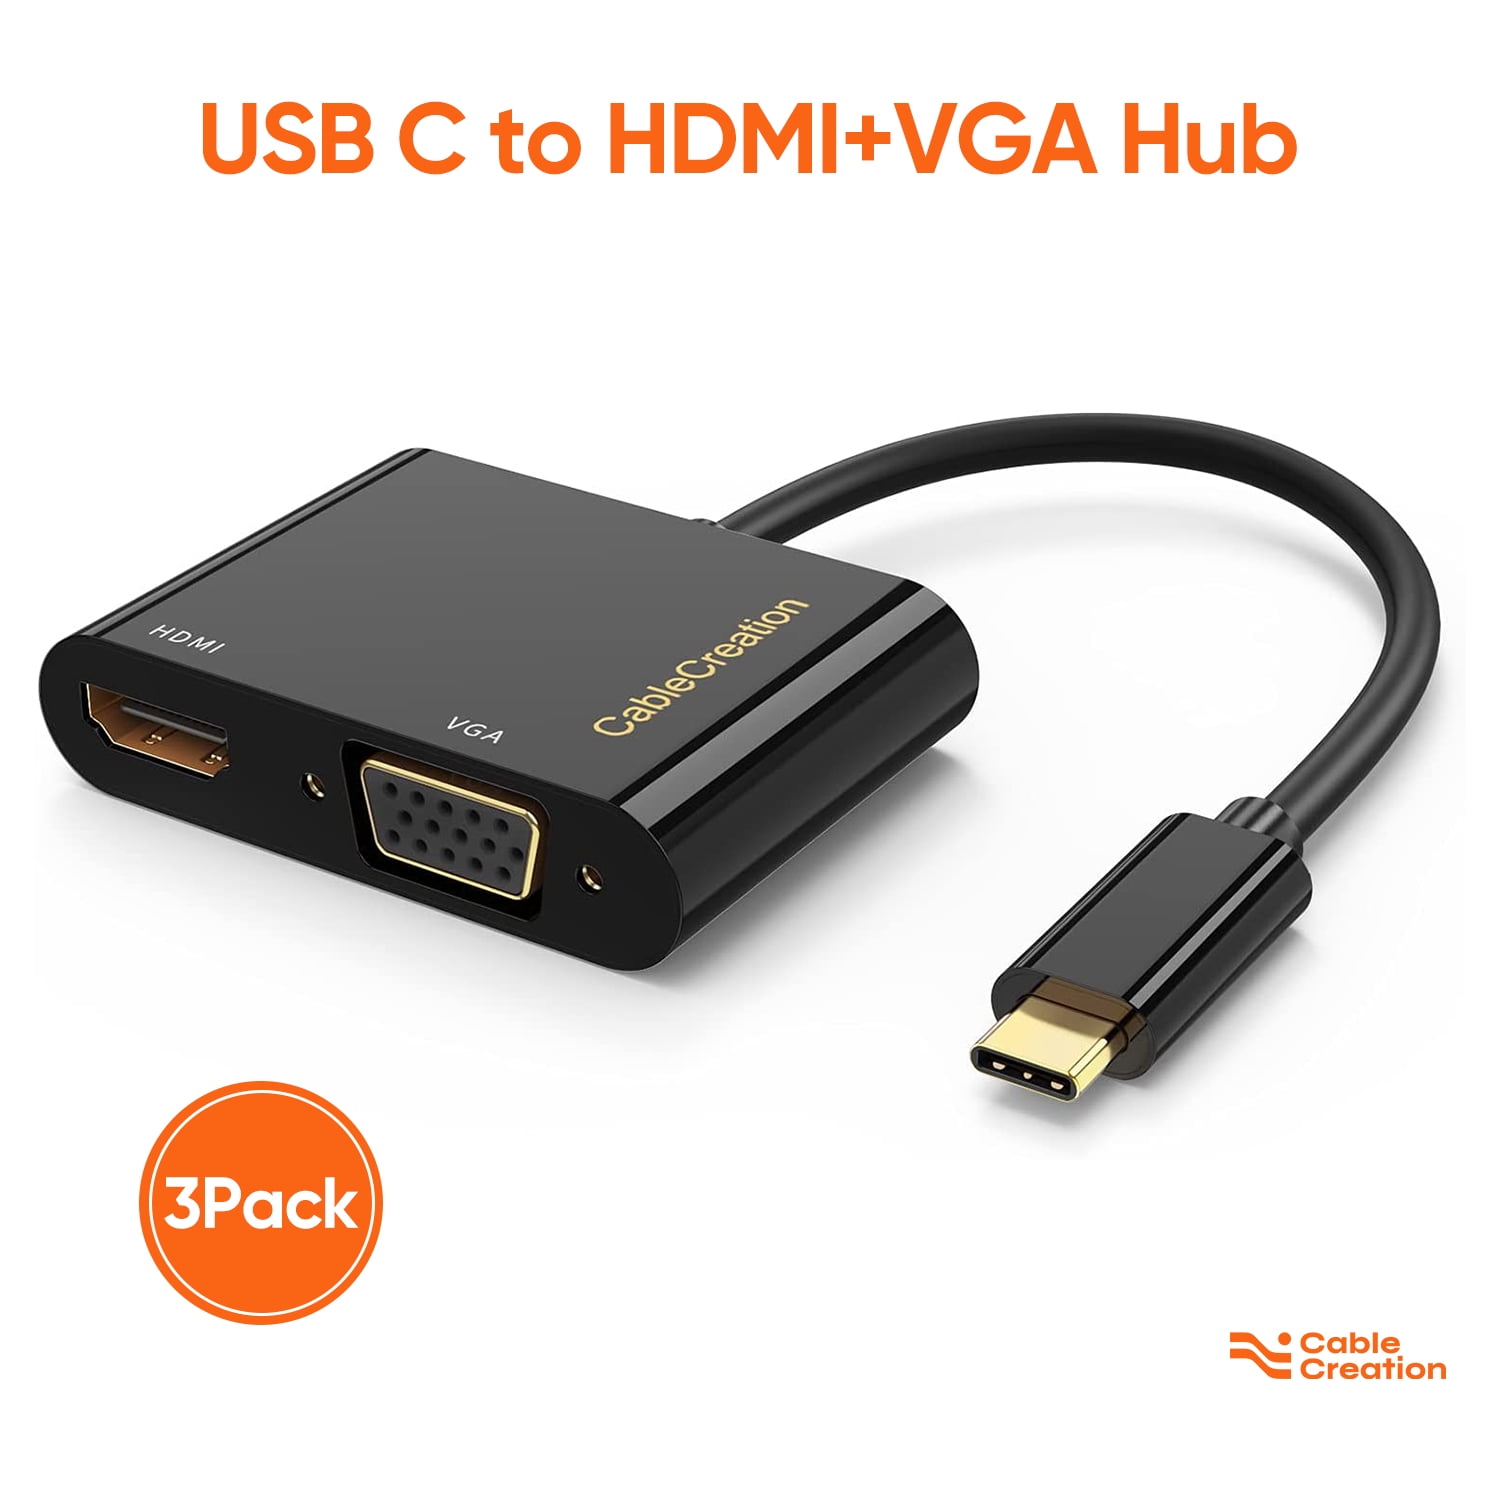 opkald Almindelig vogn CableCreation USB C to HDMI + VGA adapter, USB 3.1 Type C to VGA HDMI 4K  Splitter, Dual HDMI VGA Hub Plug and Play for Laptop / Cellphone/ Tablet  that Support Thunderbolt 3 - Walmart.com